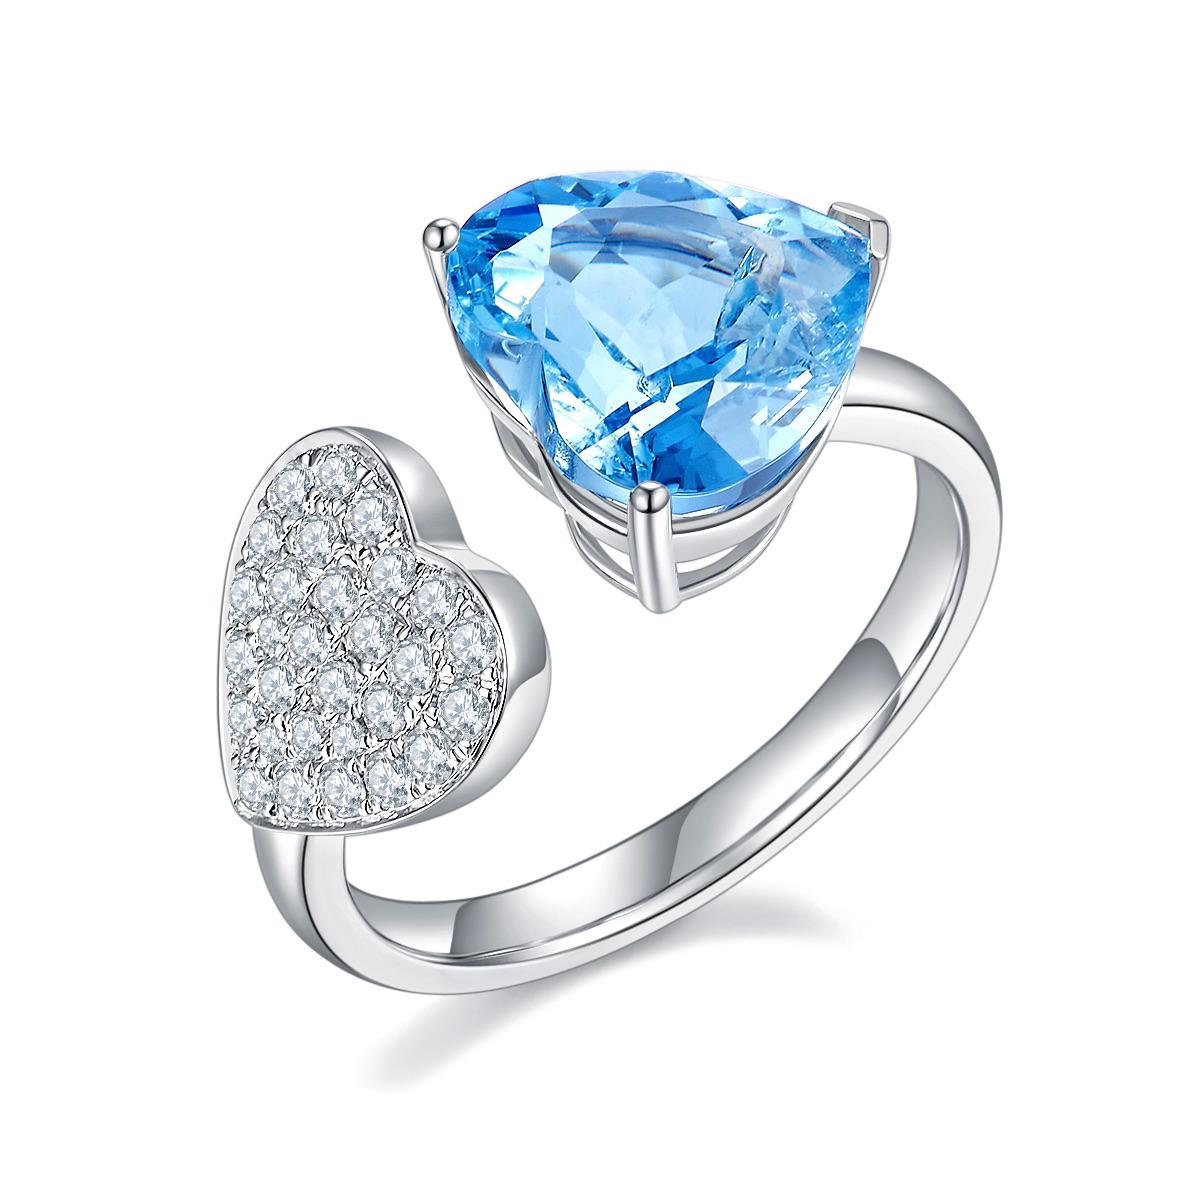 A 3 ct Aquamarine heart and Diamond Open Ring in 18k White Gold
It consists of a 3ct transparent Heart shape brilliant cut Aquamarine 
The Aquamarine is in Intense Blue colour, also known as 